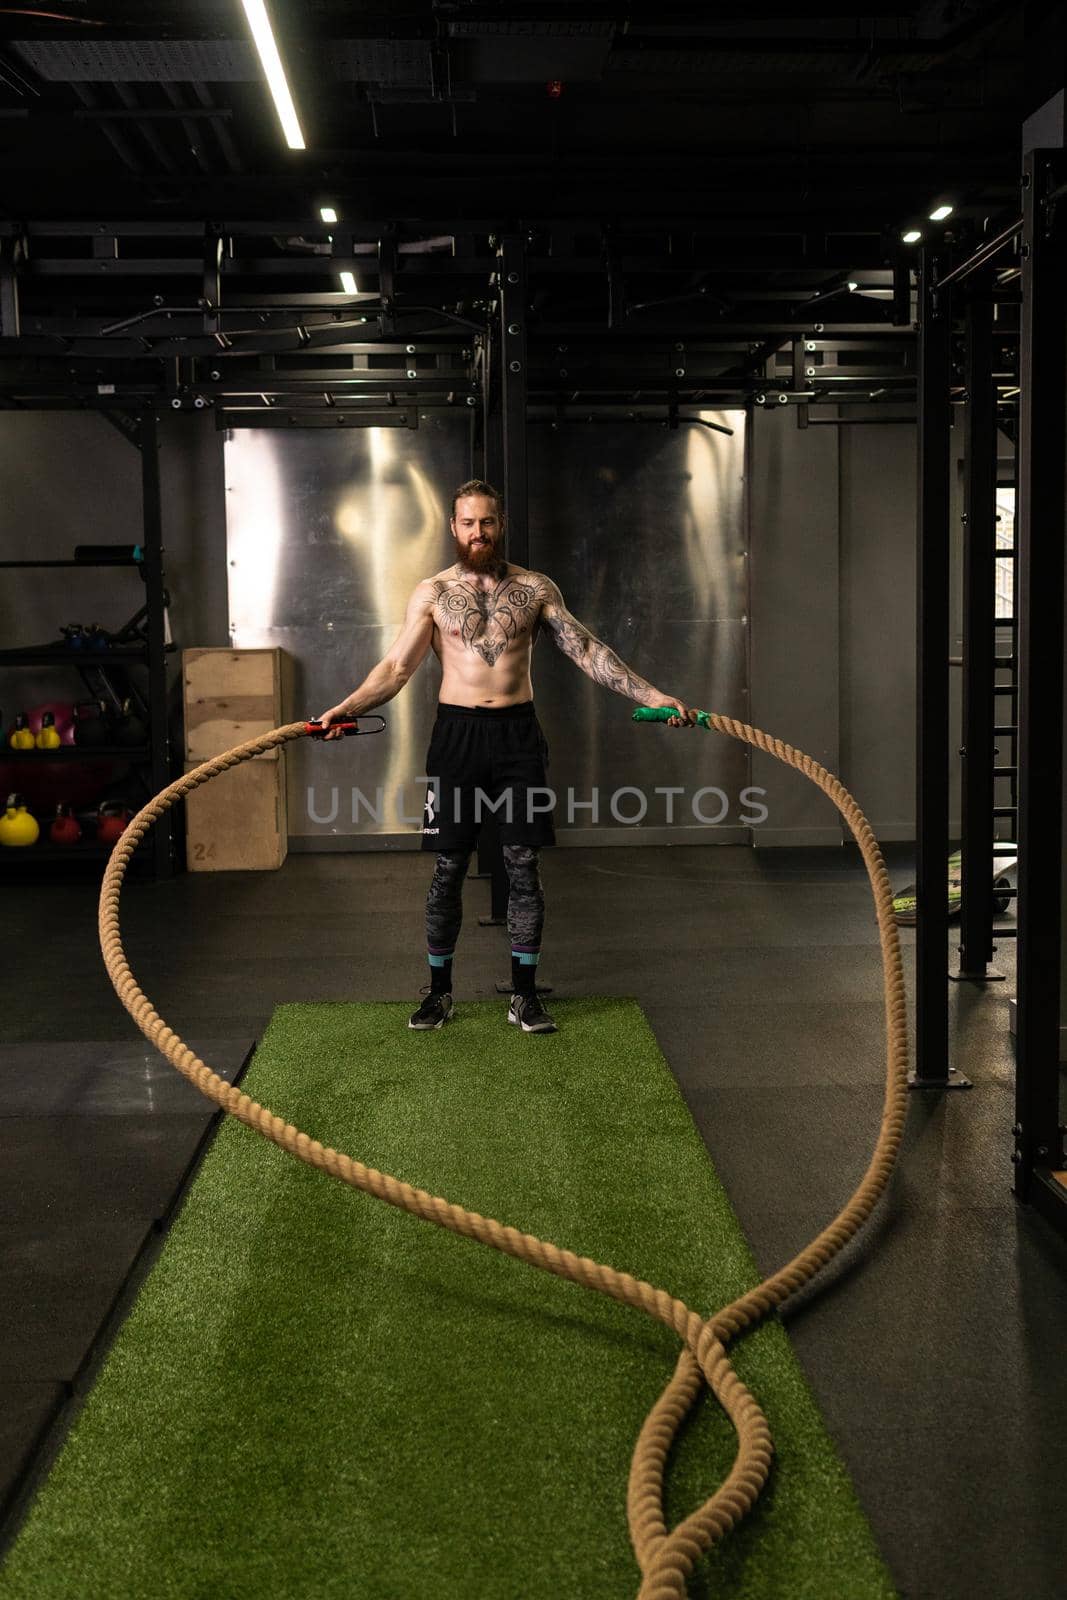 Rope man training gym warehouse fitness muscular exercising effort athlete, for strong fit from battle from practicing health, person wave. Field men outdoors,